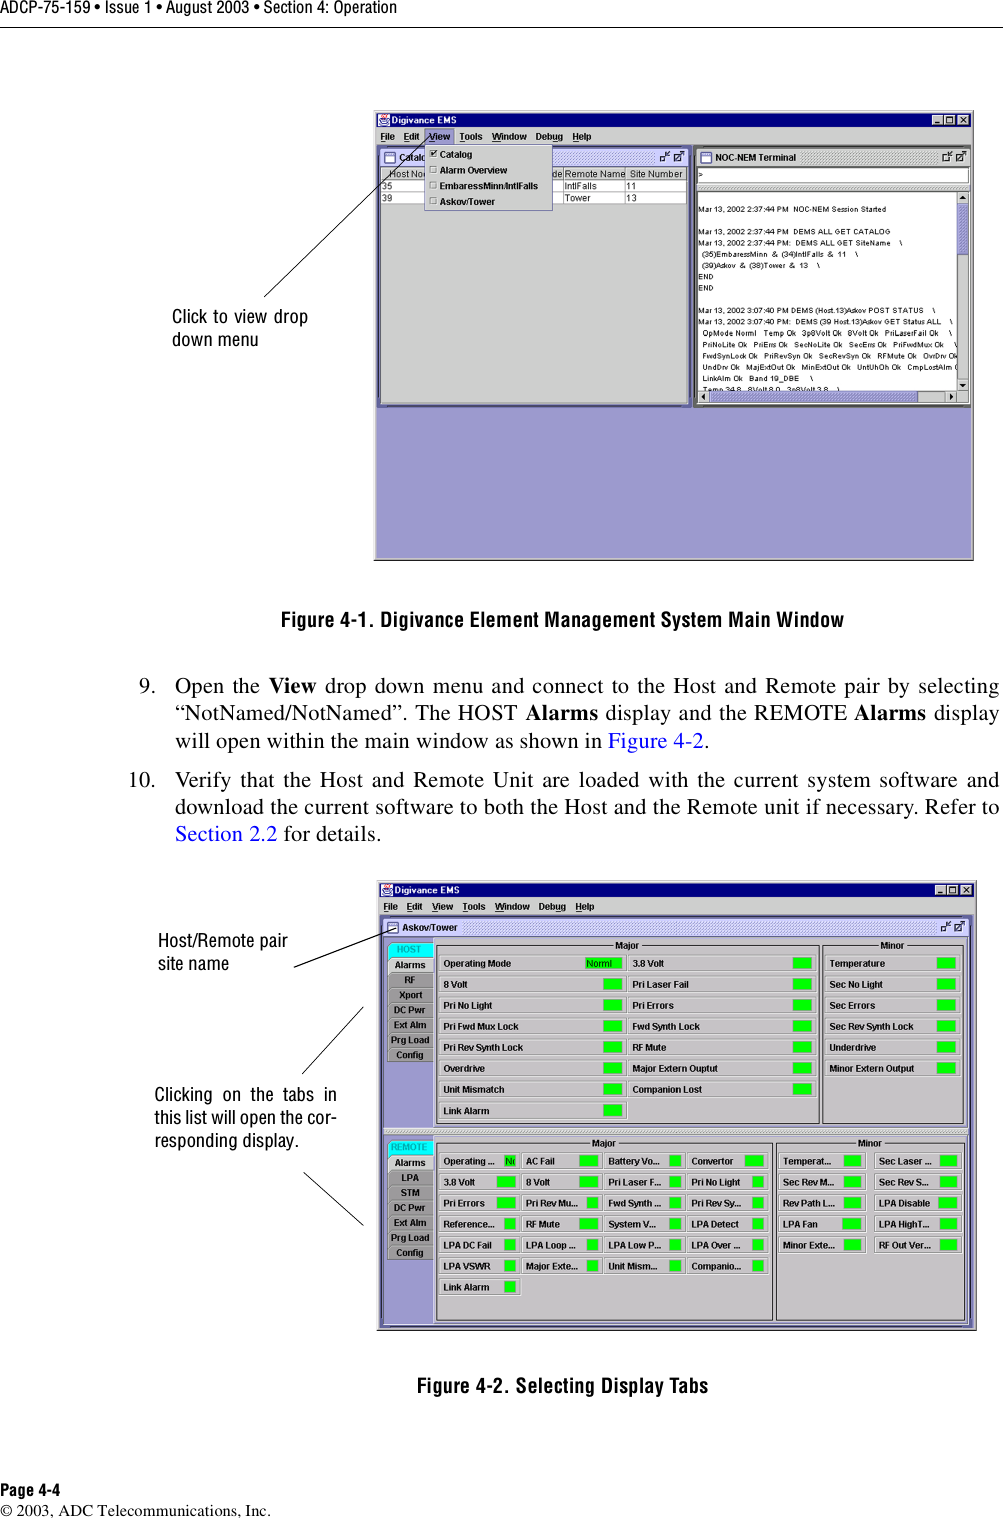 ADCP-75-159 • Issue 1 • August 2003 • Section 4: OperationPage 4-4© 2003, ADC Telecommunications, Inc.Figure 4-1. Digivance Element Management System Main Window9. Open the View drop down menu and connect to the Host and Remote pair by selecting“NotNamed/NotNamed”. The HOST Alarms display and the REMOTE Alarms displaywill open within the main window as shown in Figure 4-2. 10. Verify that the Host and Remote Unit are loaded with the current system software anddownload the current software to both the Host and the Remote unit if necessary. Refer toSection 2.2 for details. Figure 4-2. Selecting Display TabsClick to view dropdown menuClicking on the tabs inthis list will open the cor-responding display.Host/Remote pairsite name